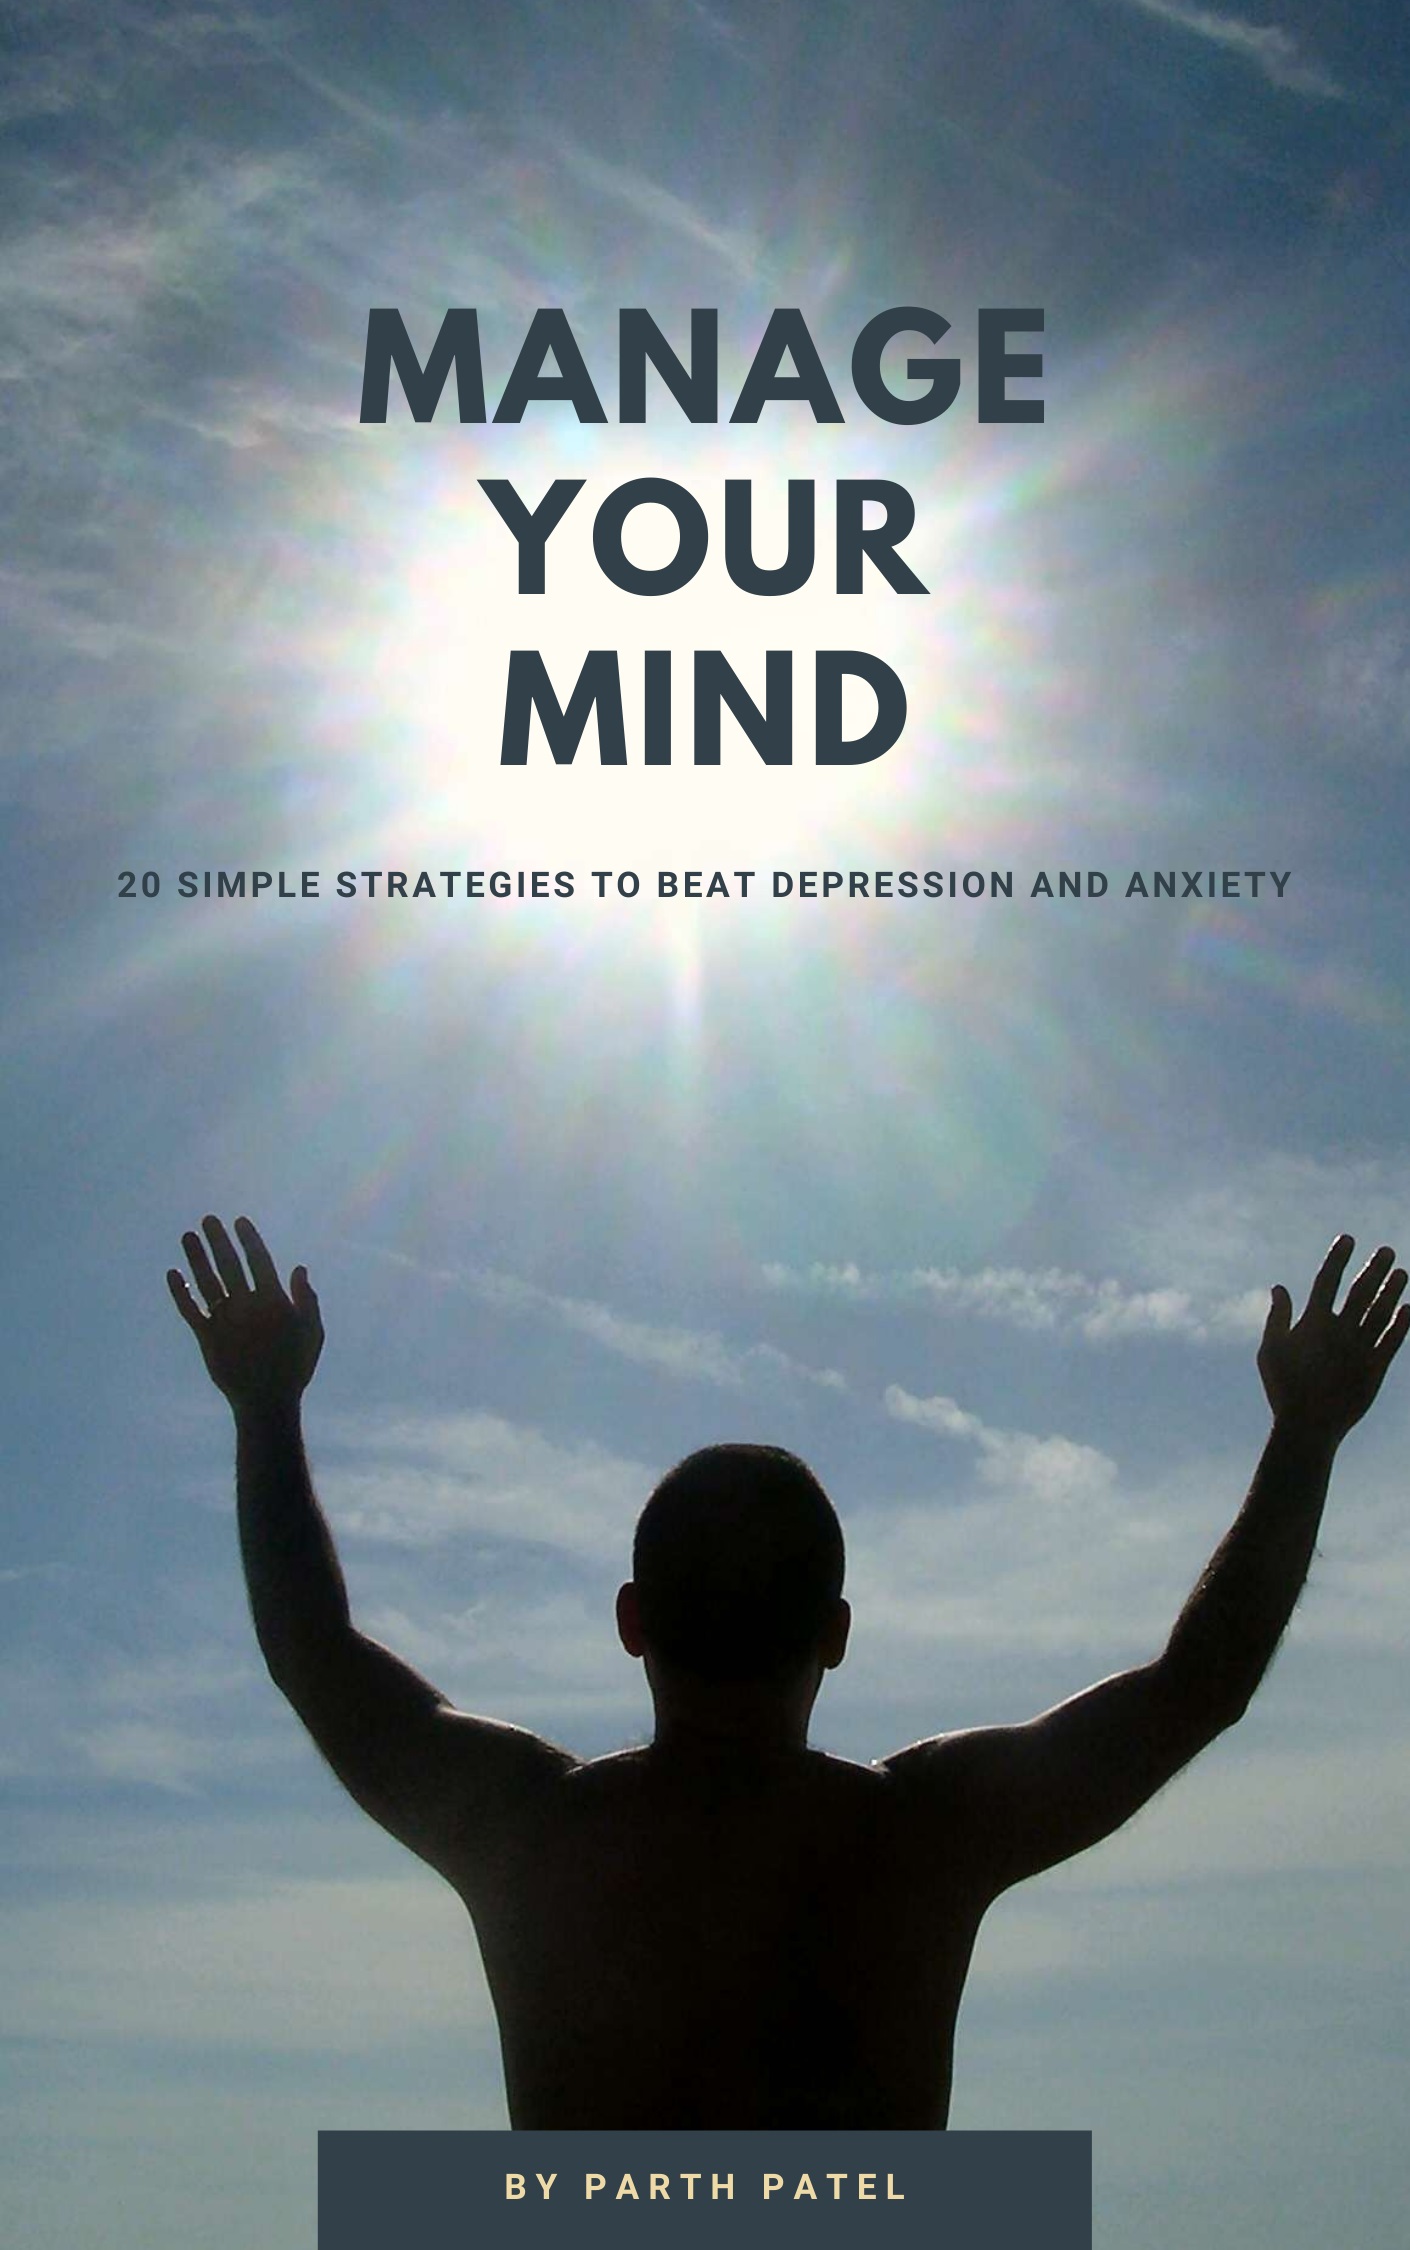 FREE: MANAGE YOUR MIND: 20 SIMPLE STRATEGIES TO BEAT DEPRESSION AND ANXIETY by Parth Patel